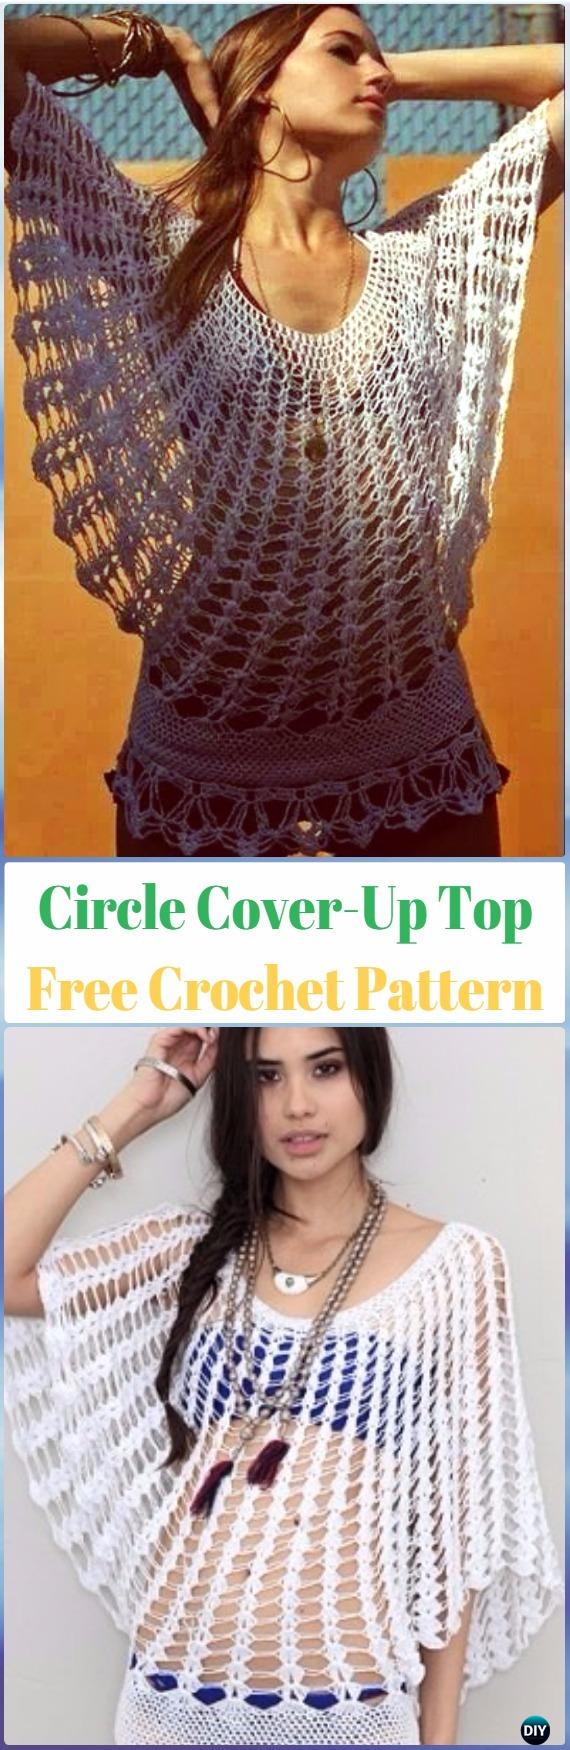 Crochet Circle Beach Cover-Up Top Free Pattern - Crochet Beach Cover Up Free Patterns